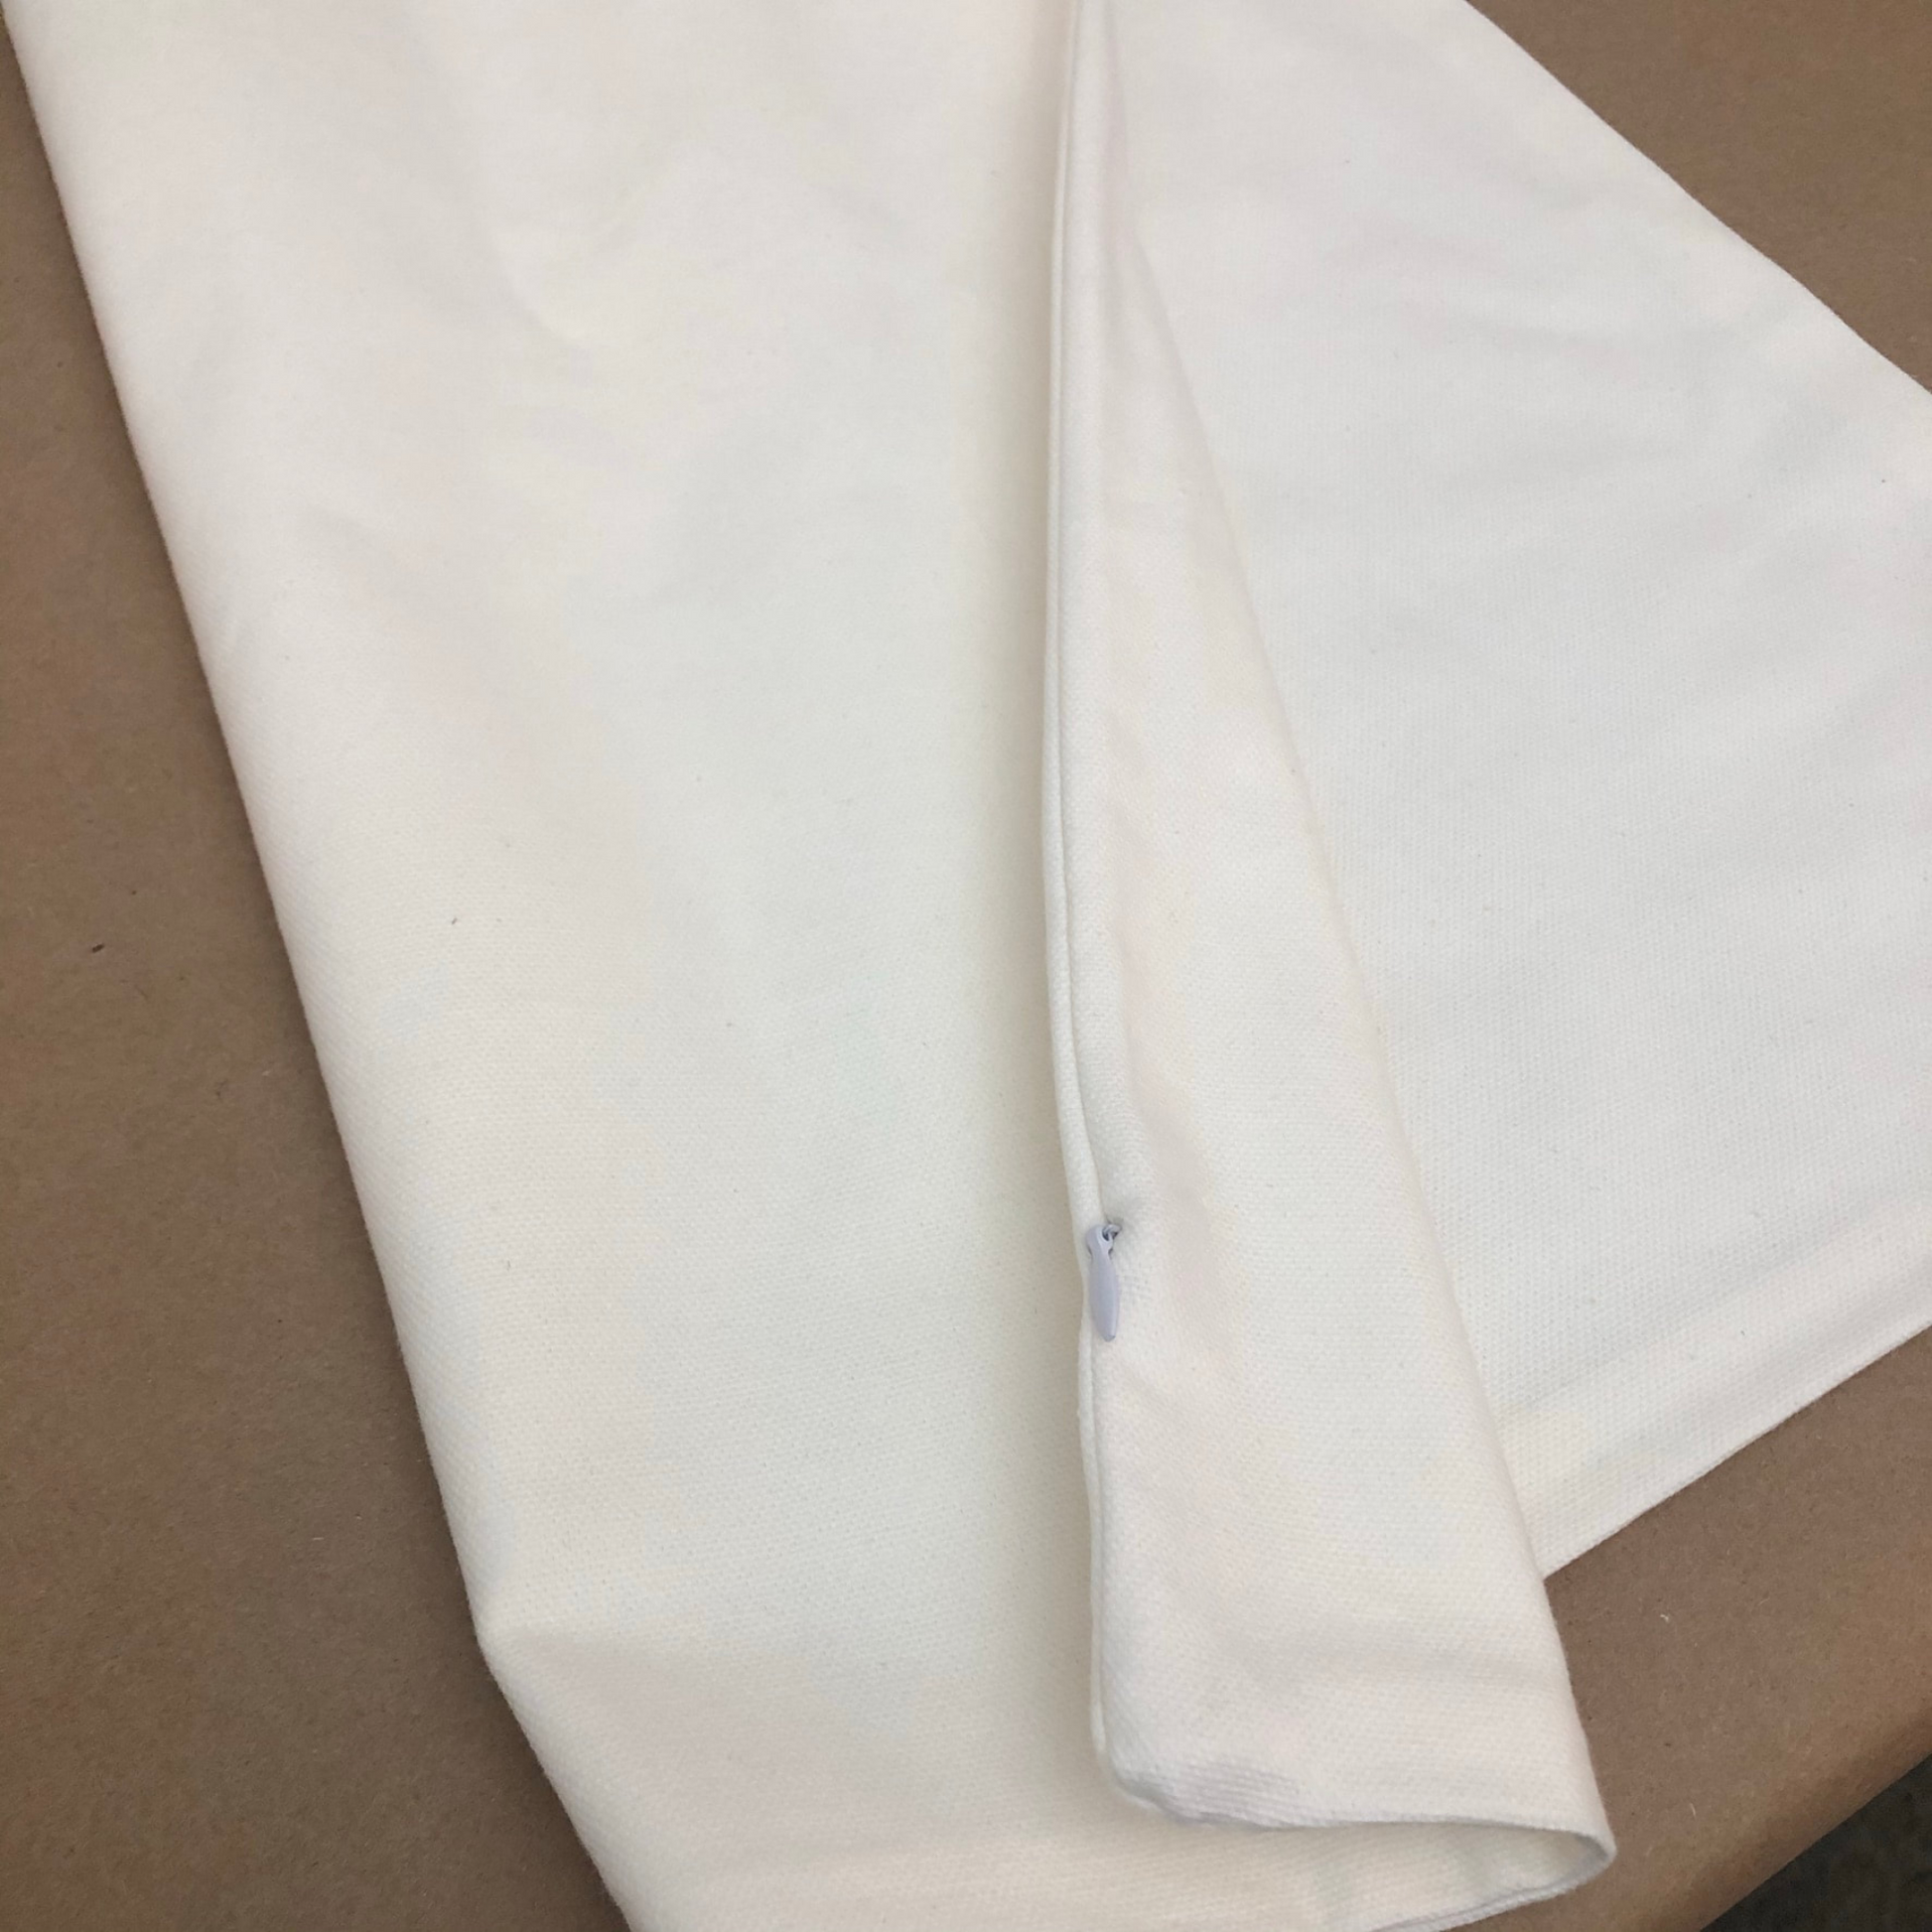 Canvas Pillow Cover with invisible zipper closure in natural white at Milton's Daughter